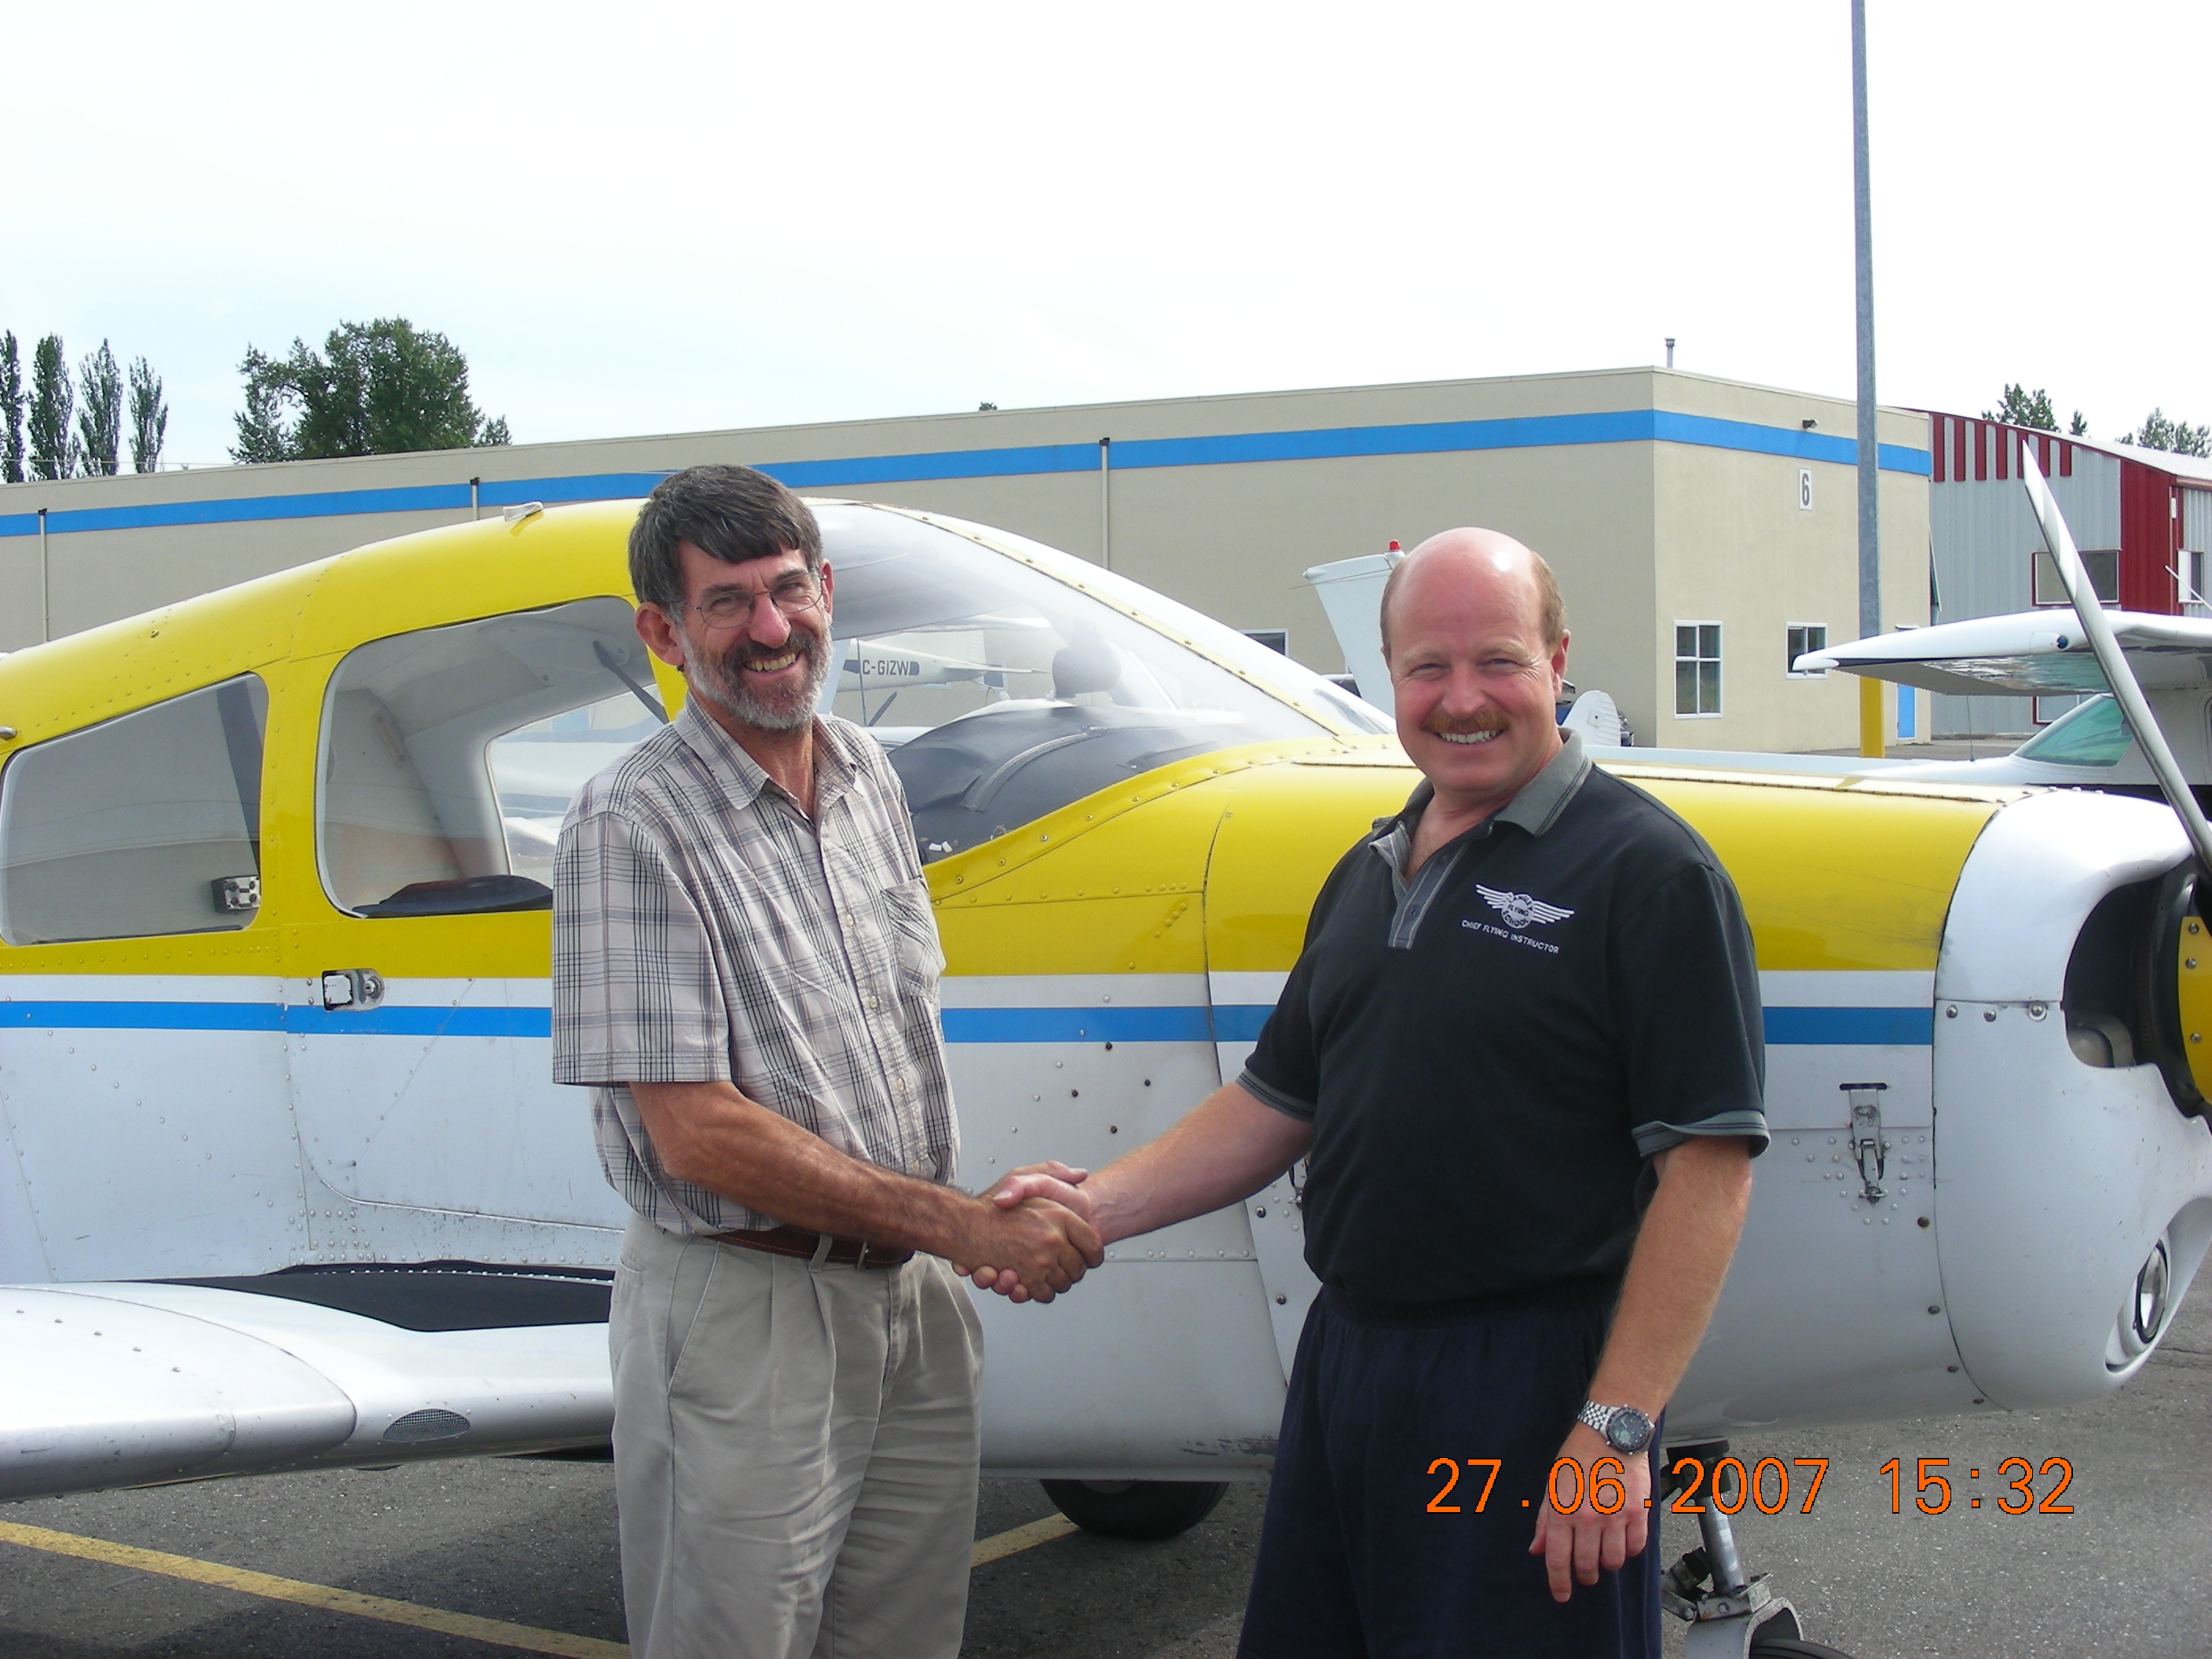 Ed Boon with Chief Flight Instructor David Parry after successfully completing his Private Pilot Flight Test on June 27, 2007 in Cherokee GODP.  Langley Flying School